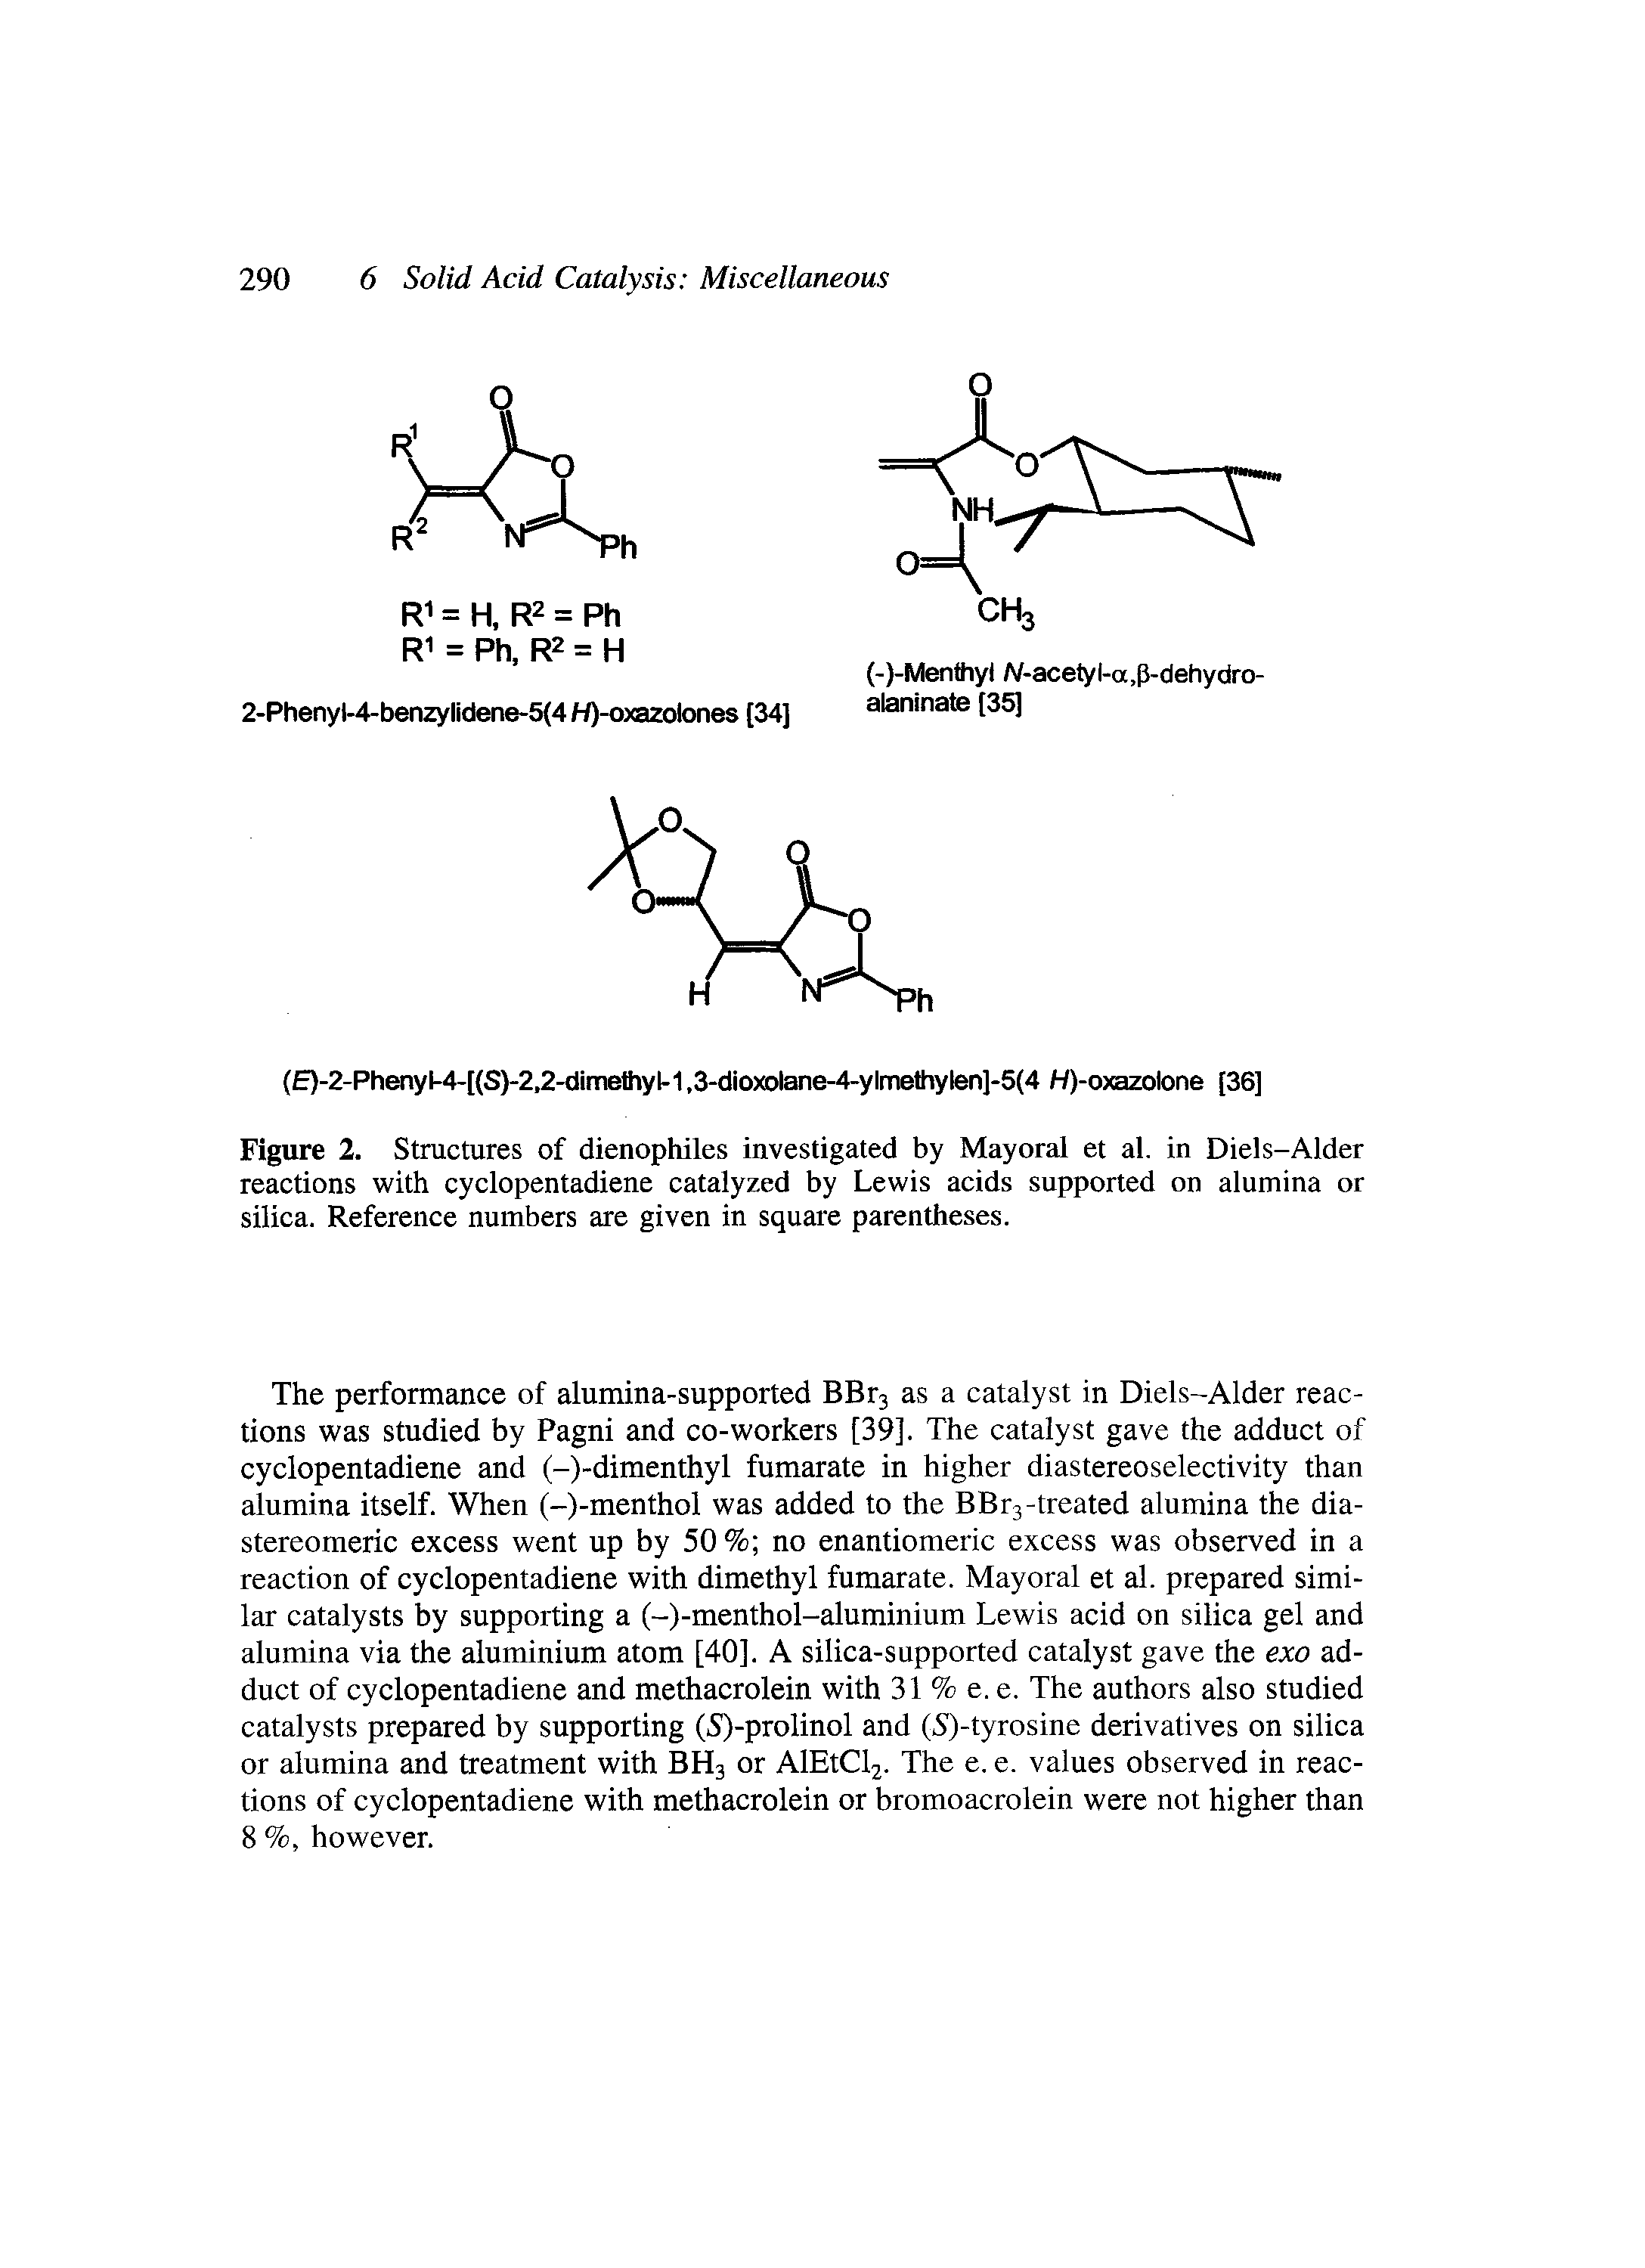 Figure 2. Structures of dienophiles investigated by Mayoral et al. in Diels-Alder reactions with cyclopentadiene catalyzed by Lewis acids supported on alumina or silica. Reference numbers are given in square parentheses.